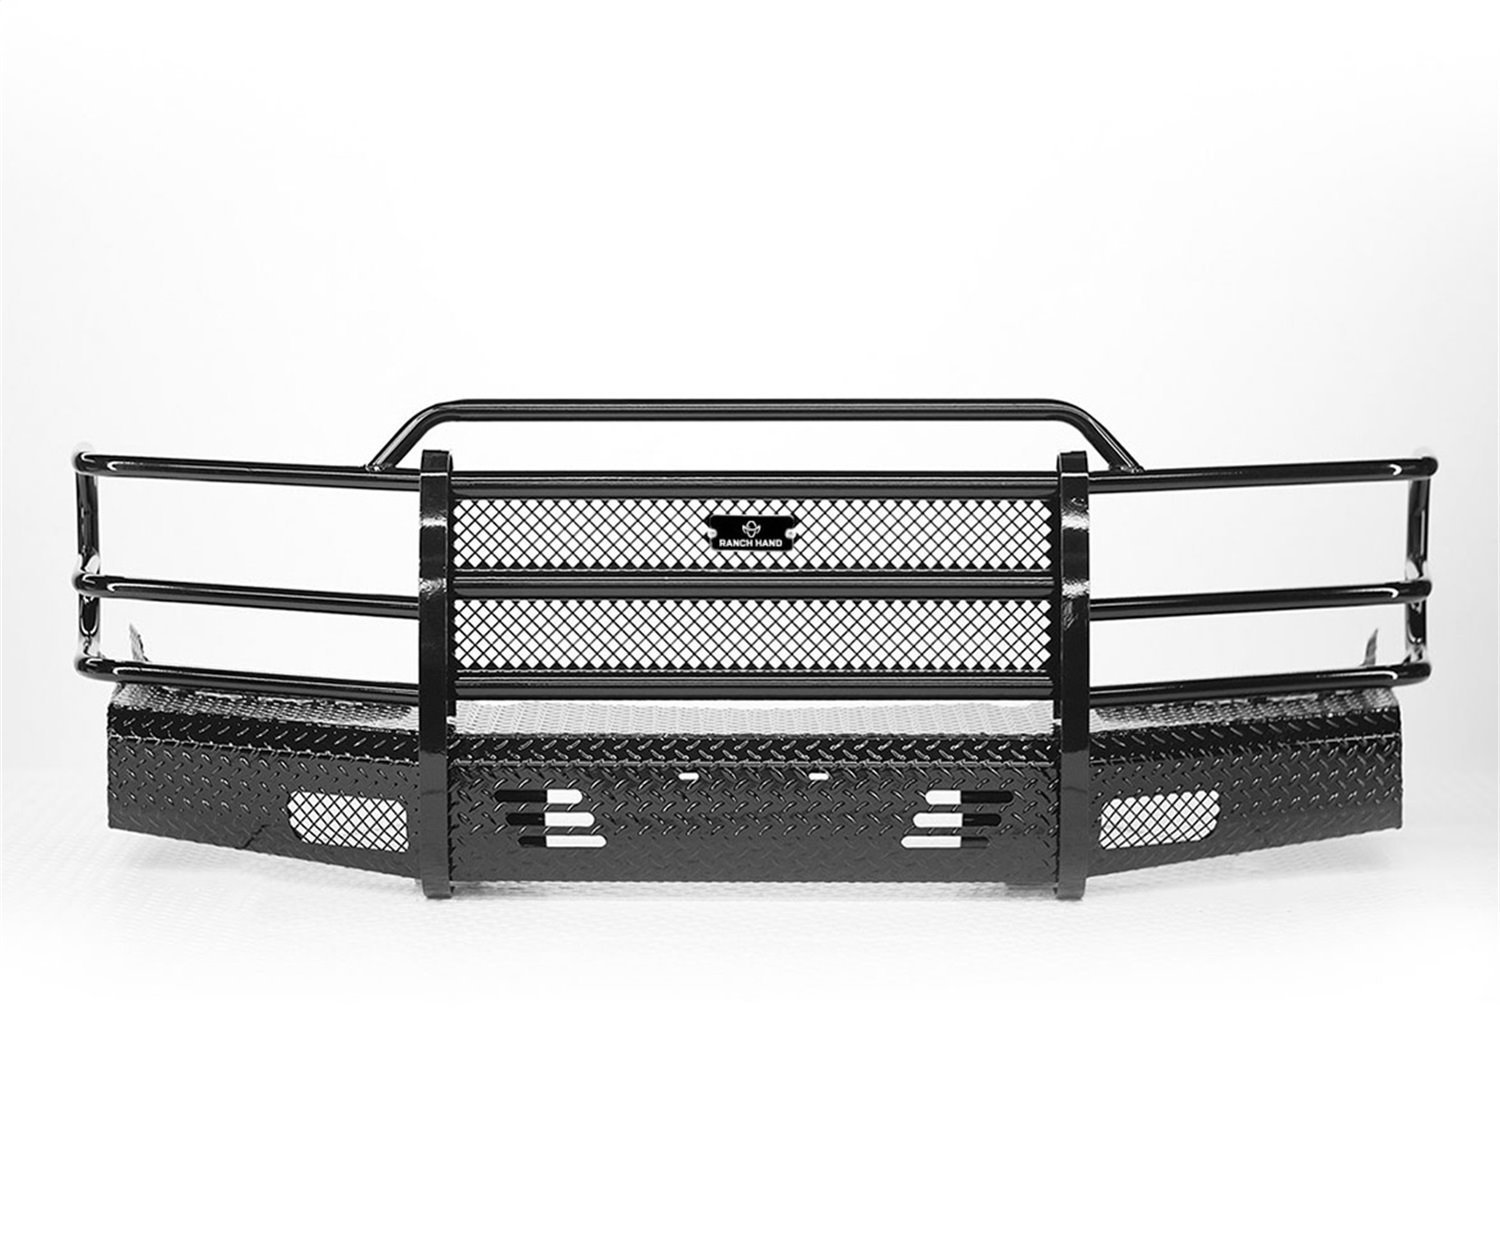 Summit Series Front Bumper For 2000-2006 Chevy Suburban,